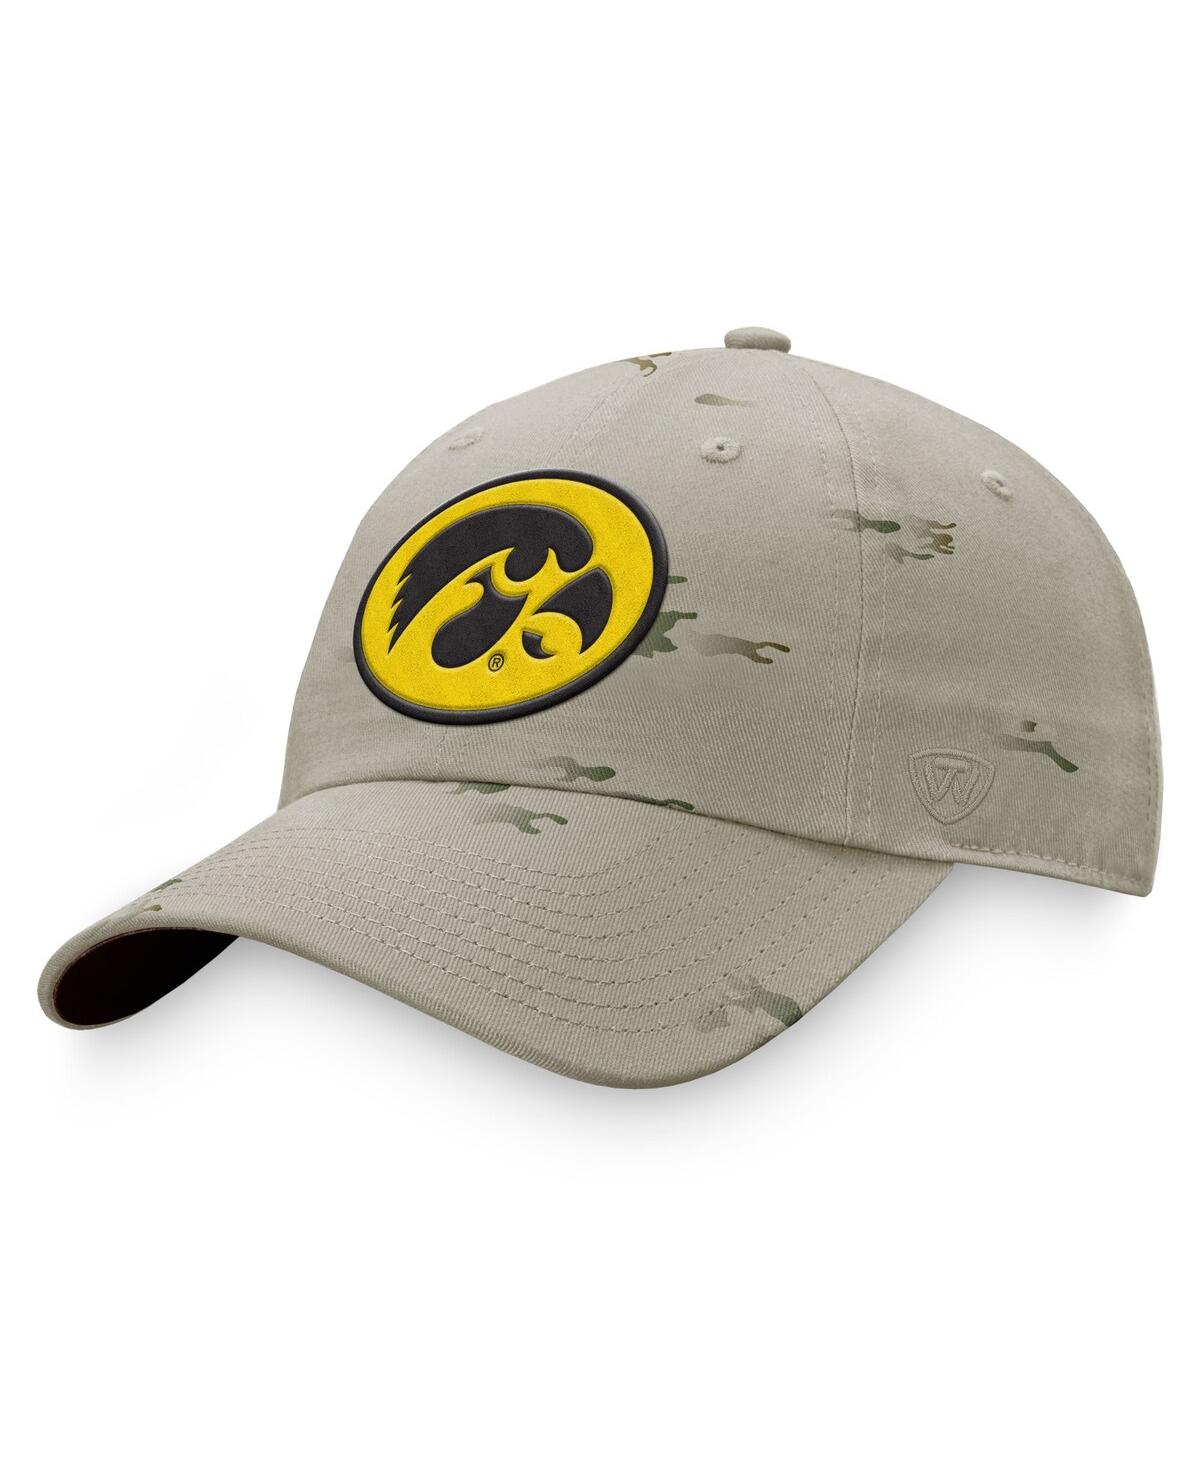 Shop Top Of The World Men's  Khaki Iowa Hawkeyes Oht Military-inspired Appreciation Storm Adjustable Hat